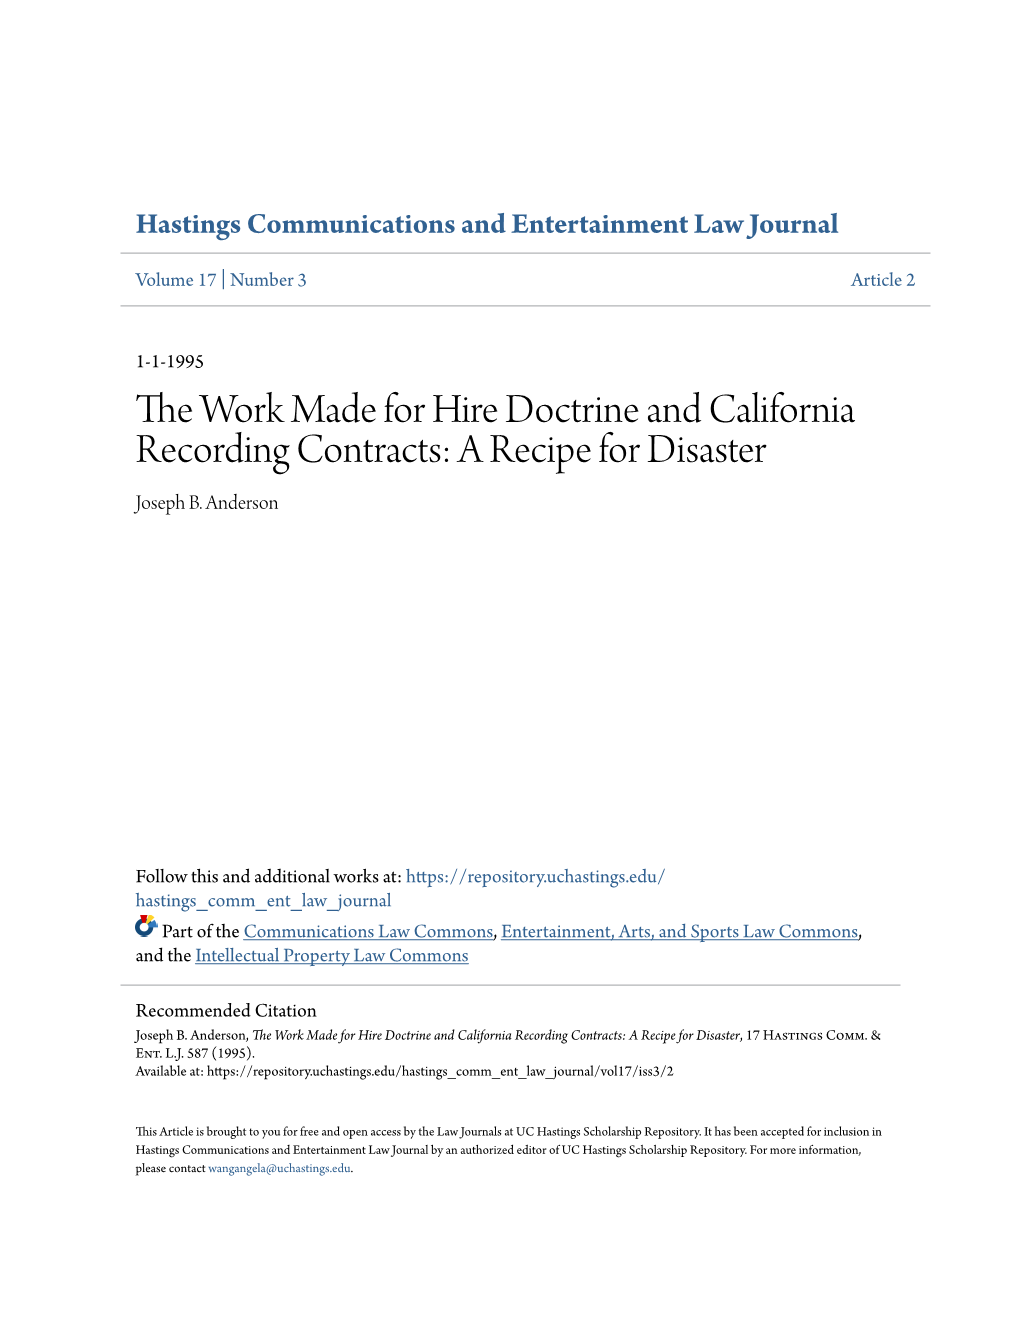 The Work Made for Hire Doctrine and California Recording Contracts: a Recipe for Disaster, 17 Hastings Comm